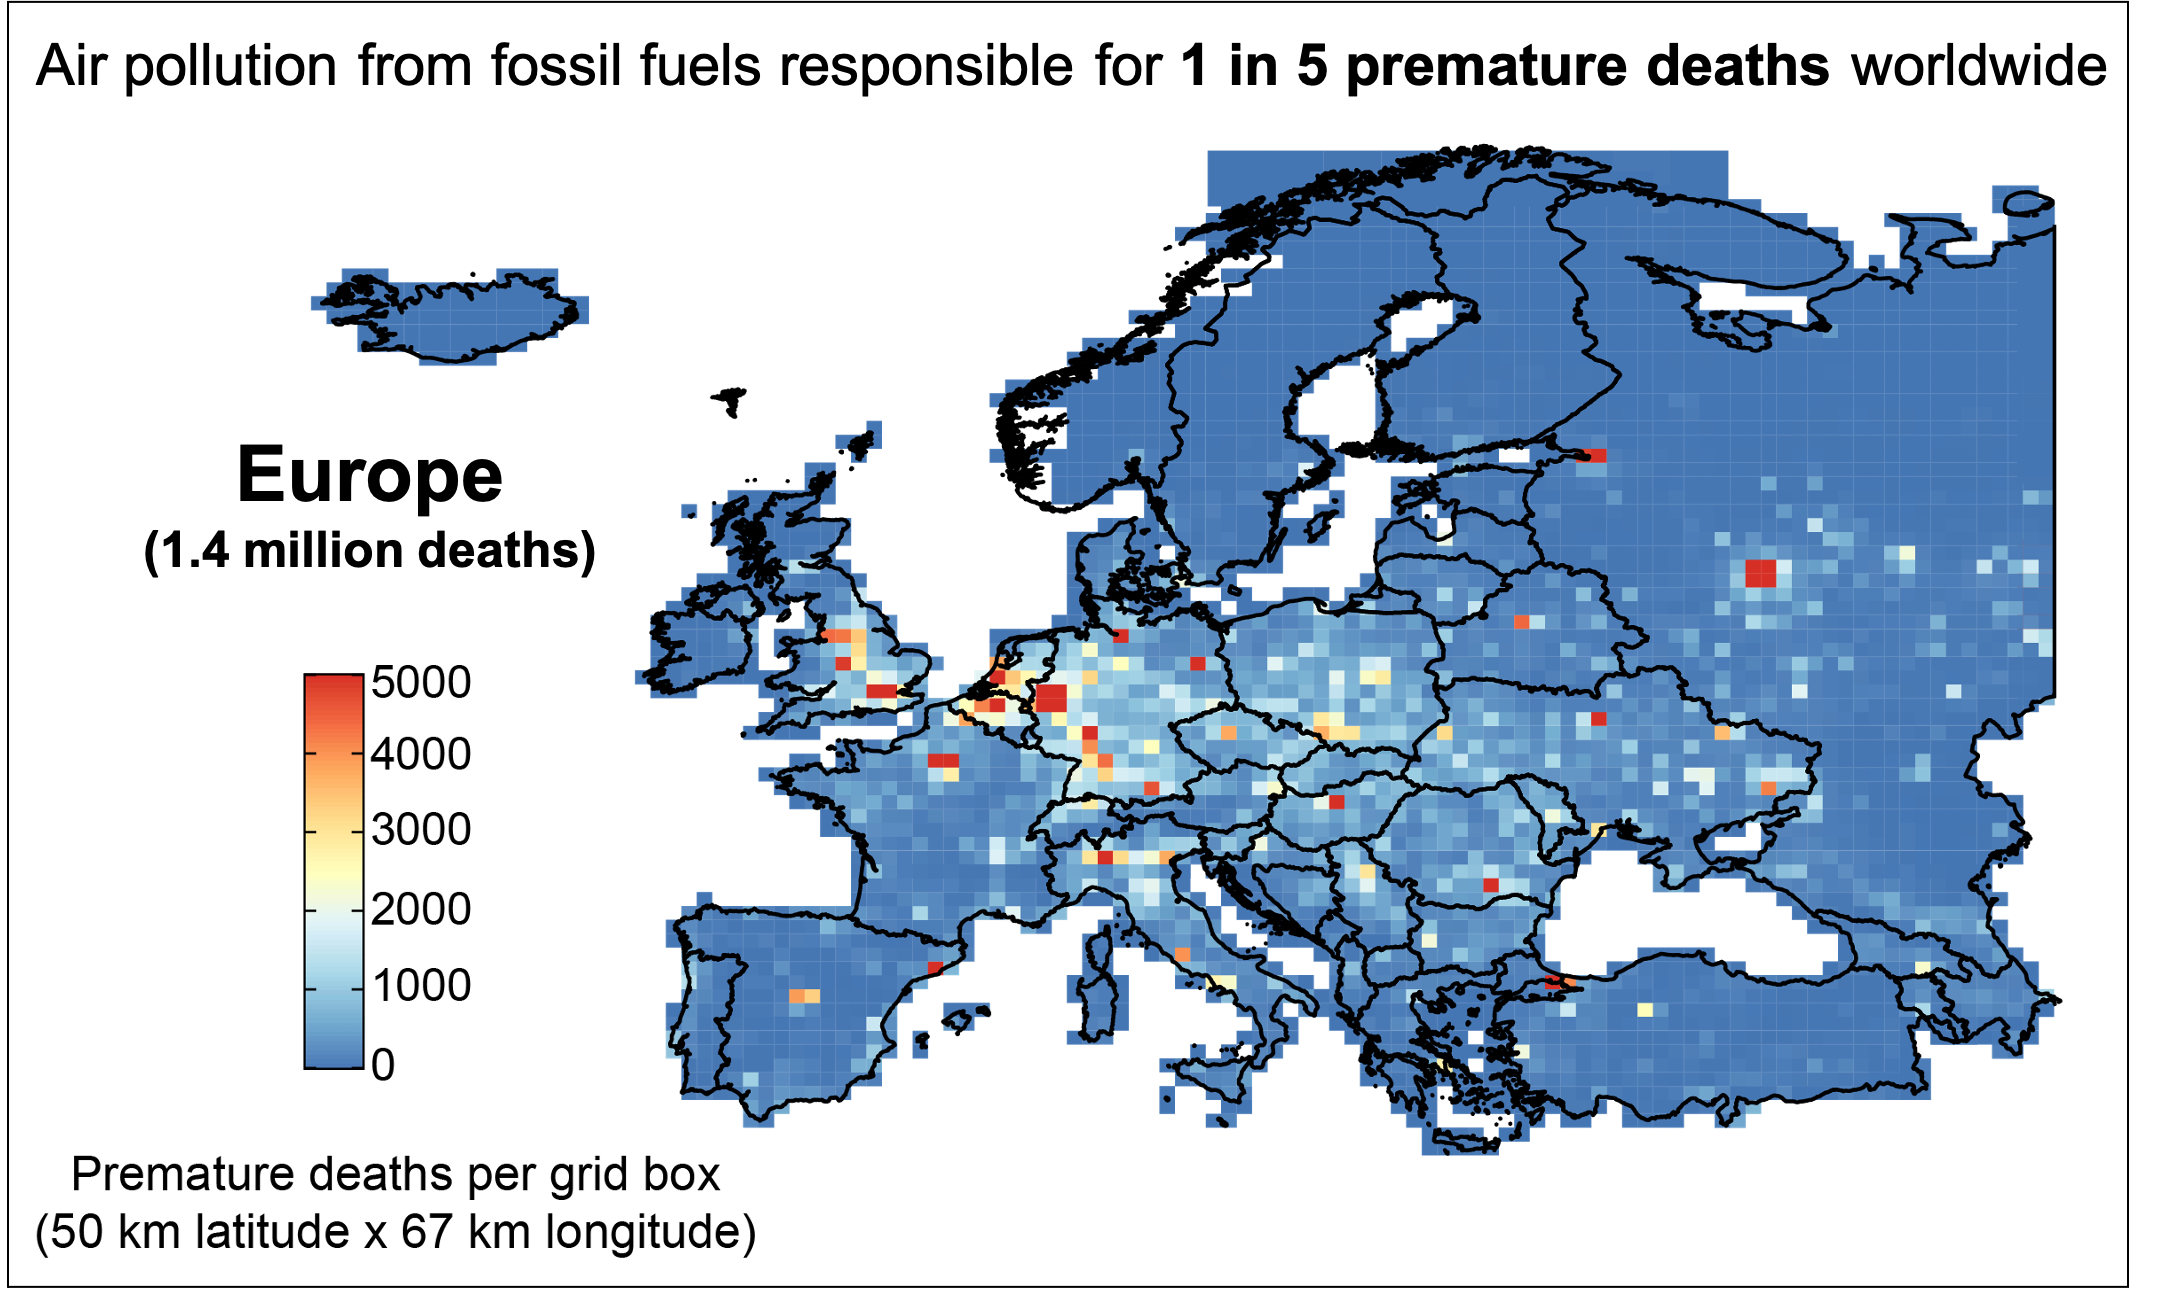 Premature mortality in Europe due to fossil fuel air pollution